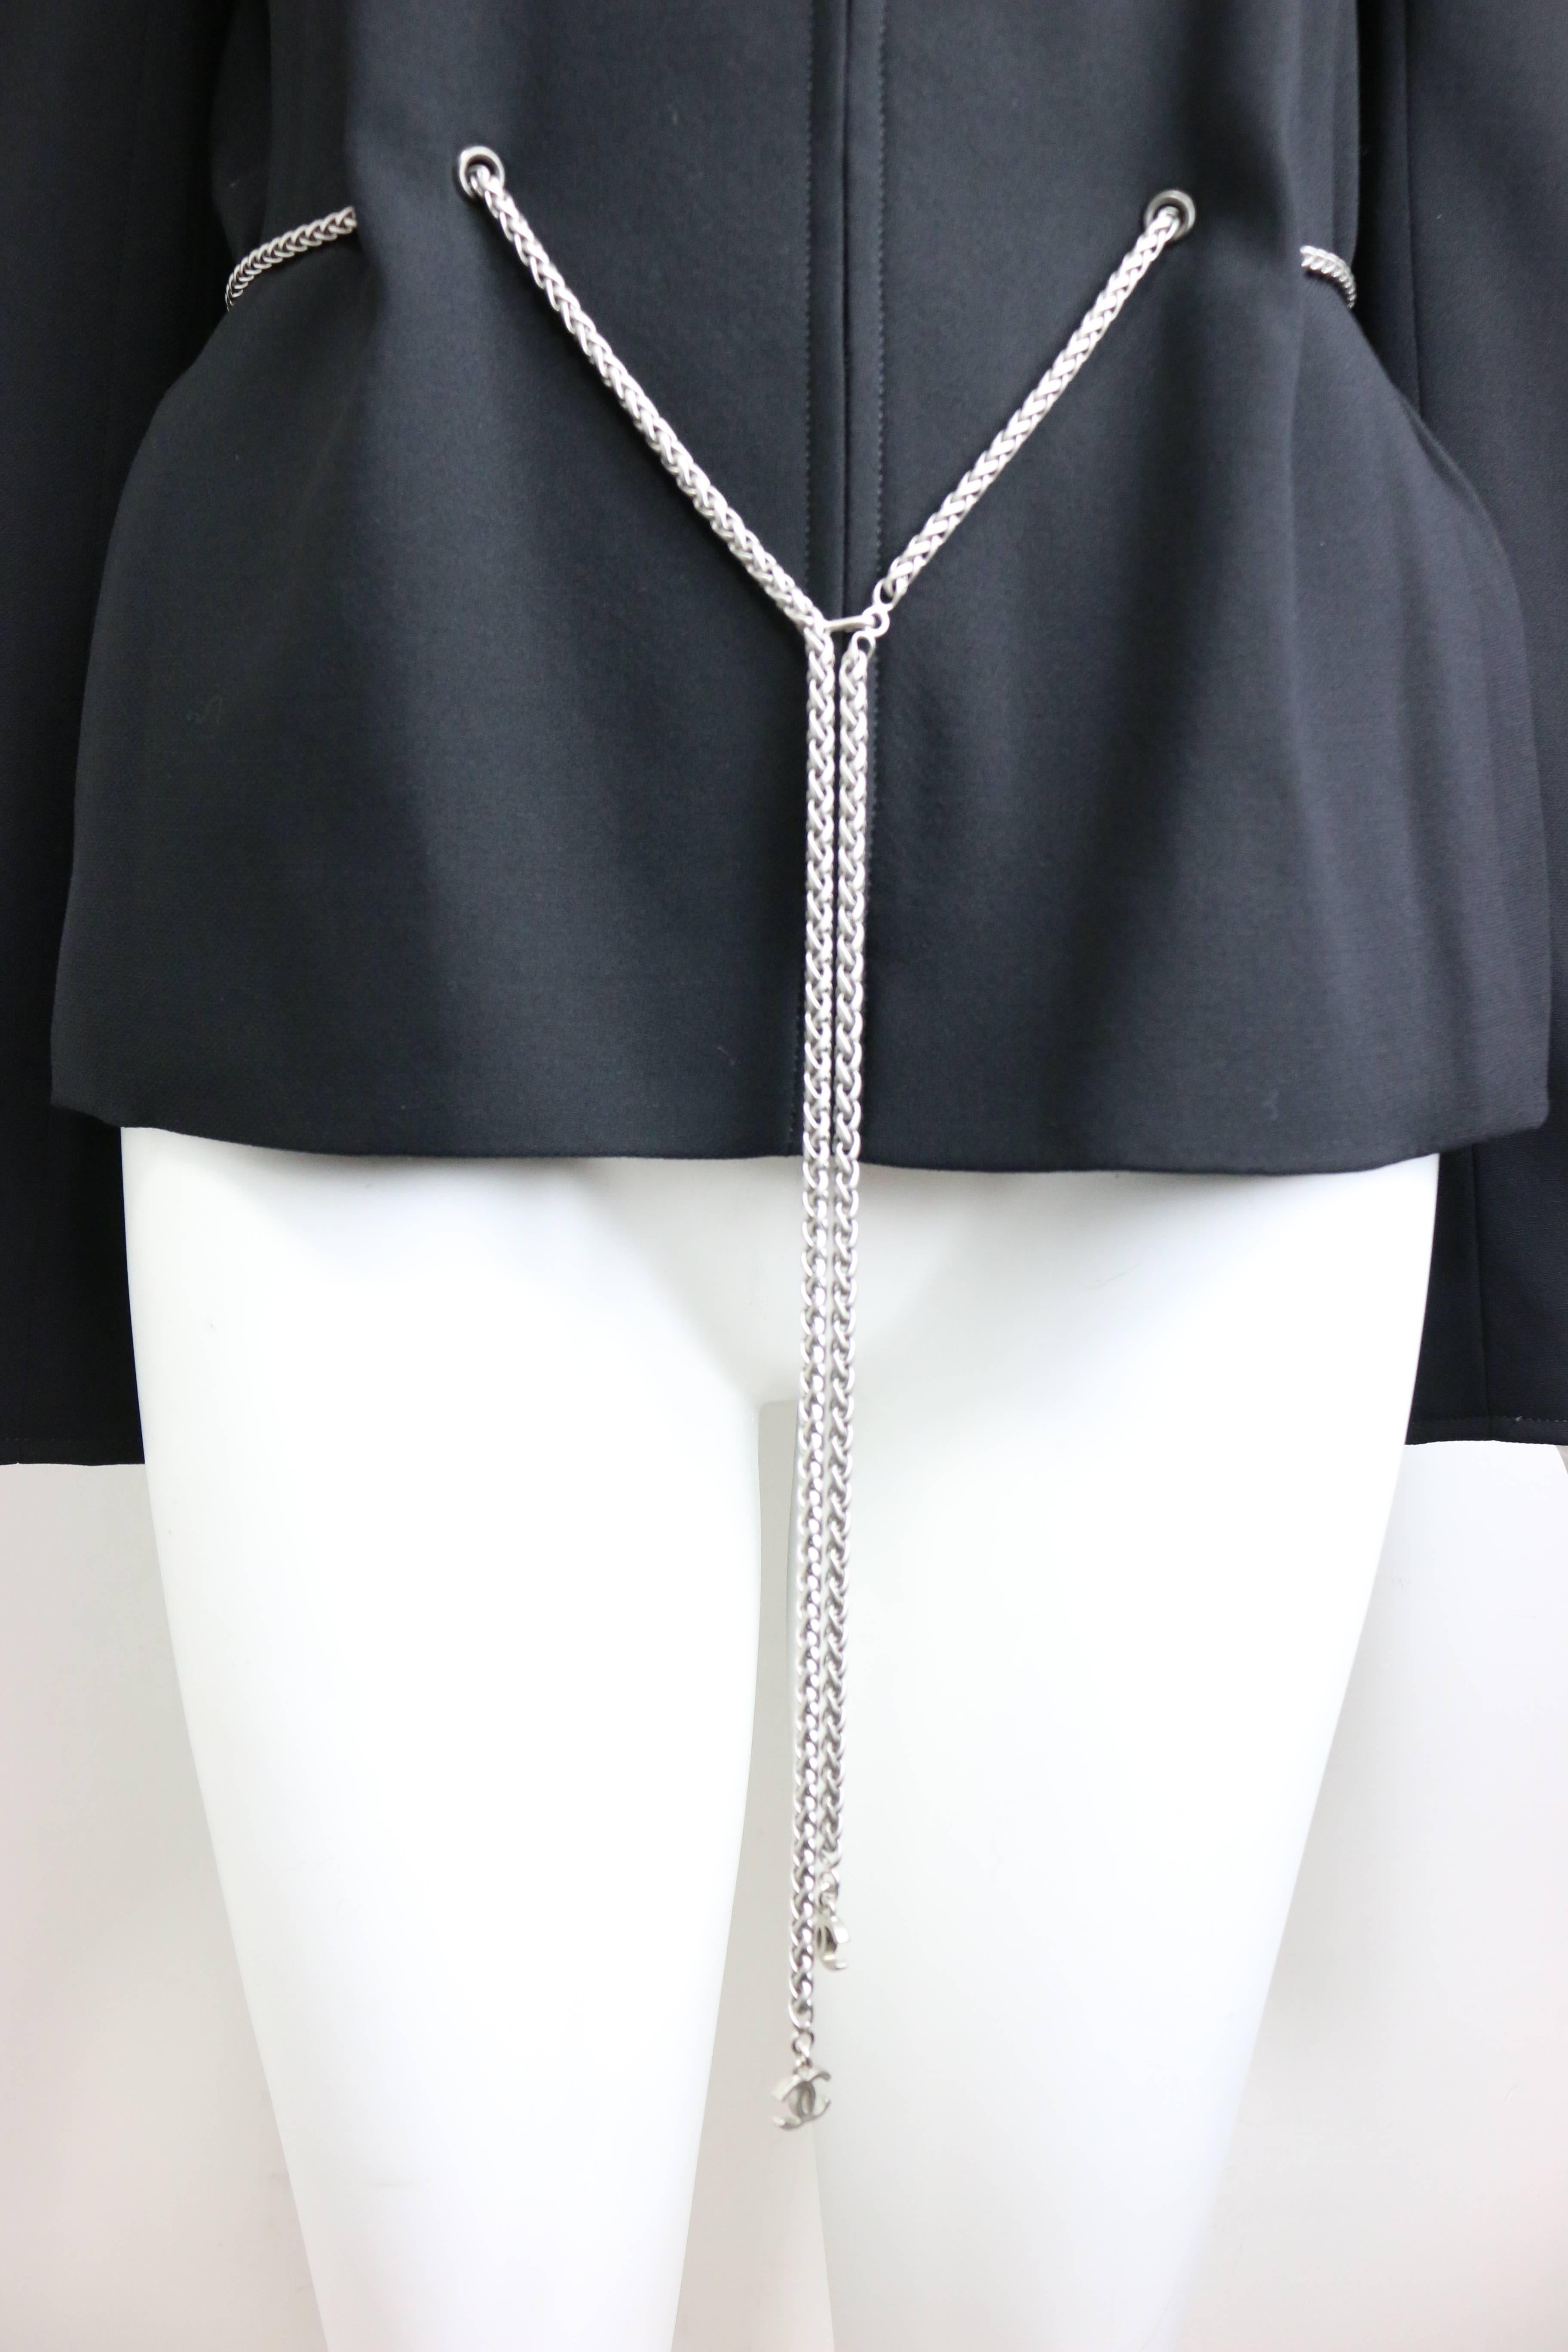 - Vintage Chanel black wool waist chain collarless jacket from 1998 pre-collection. Featuring a silver toned chain connects throughout the waistline with two 